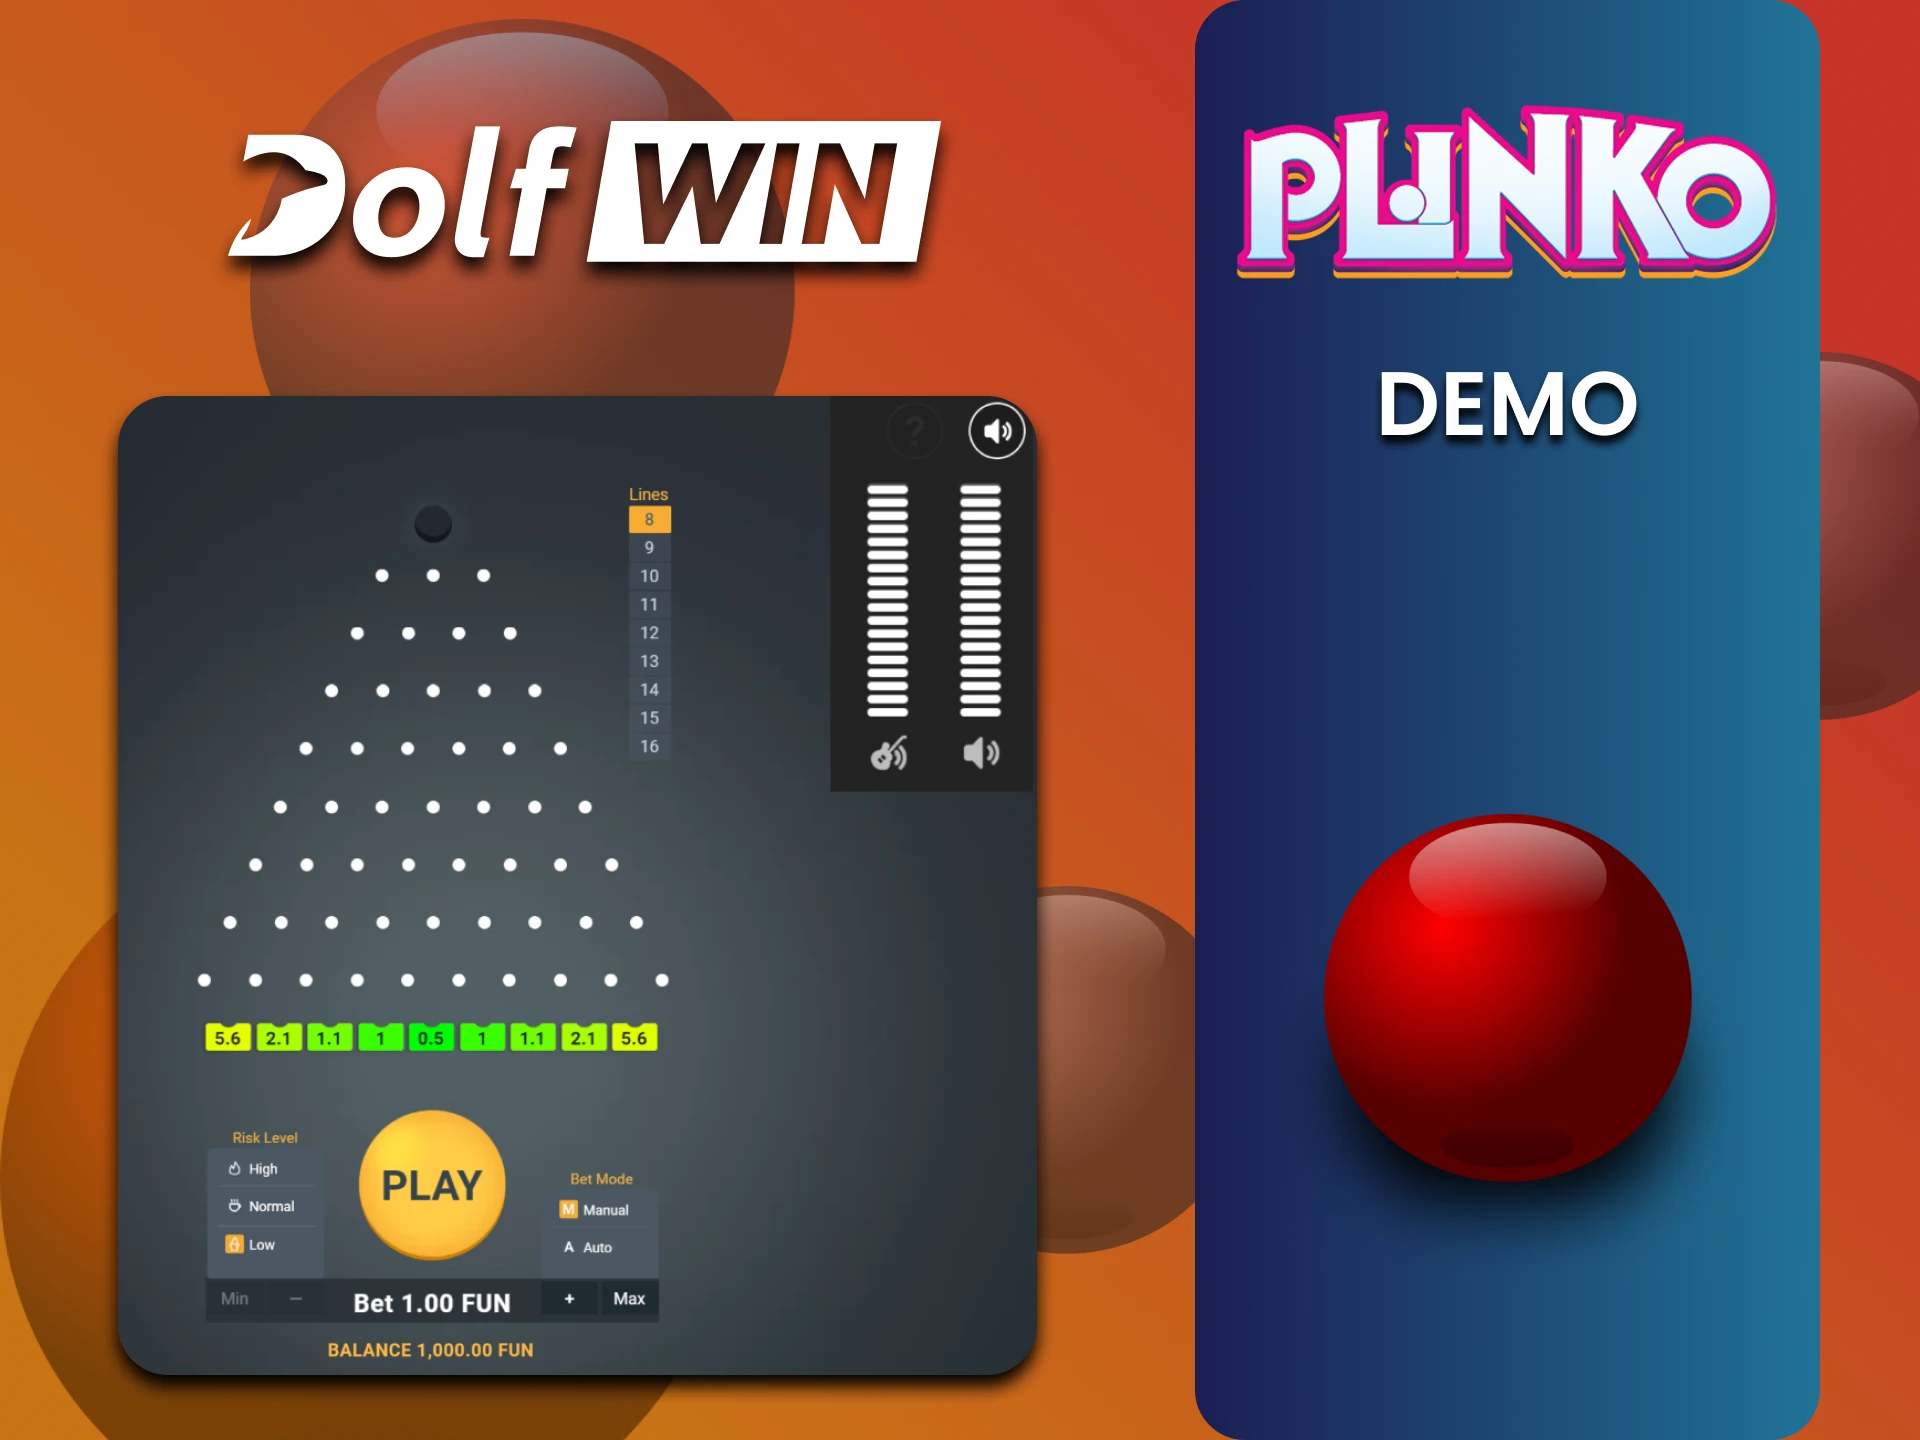 Practice with a demo version of the Plinko game on the Dolfwin website.